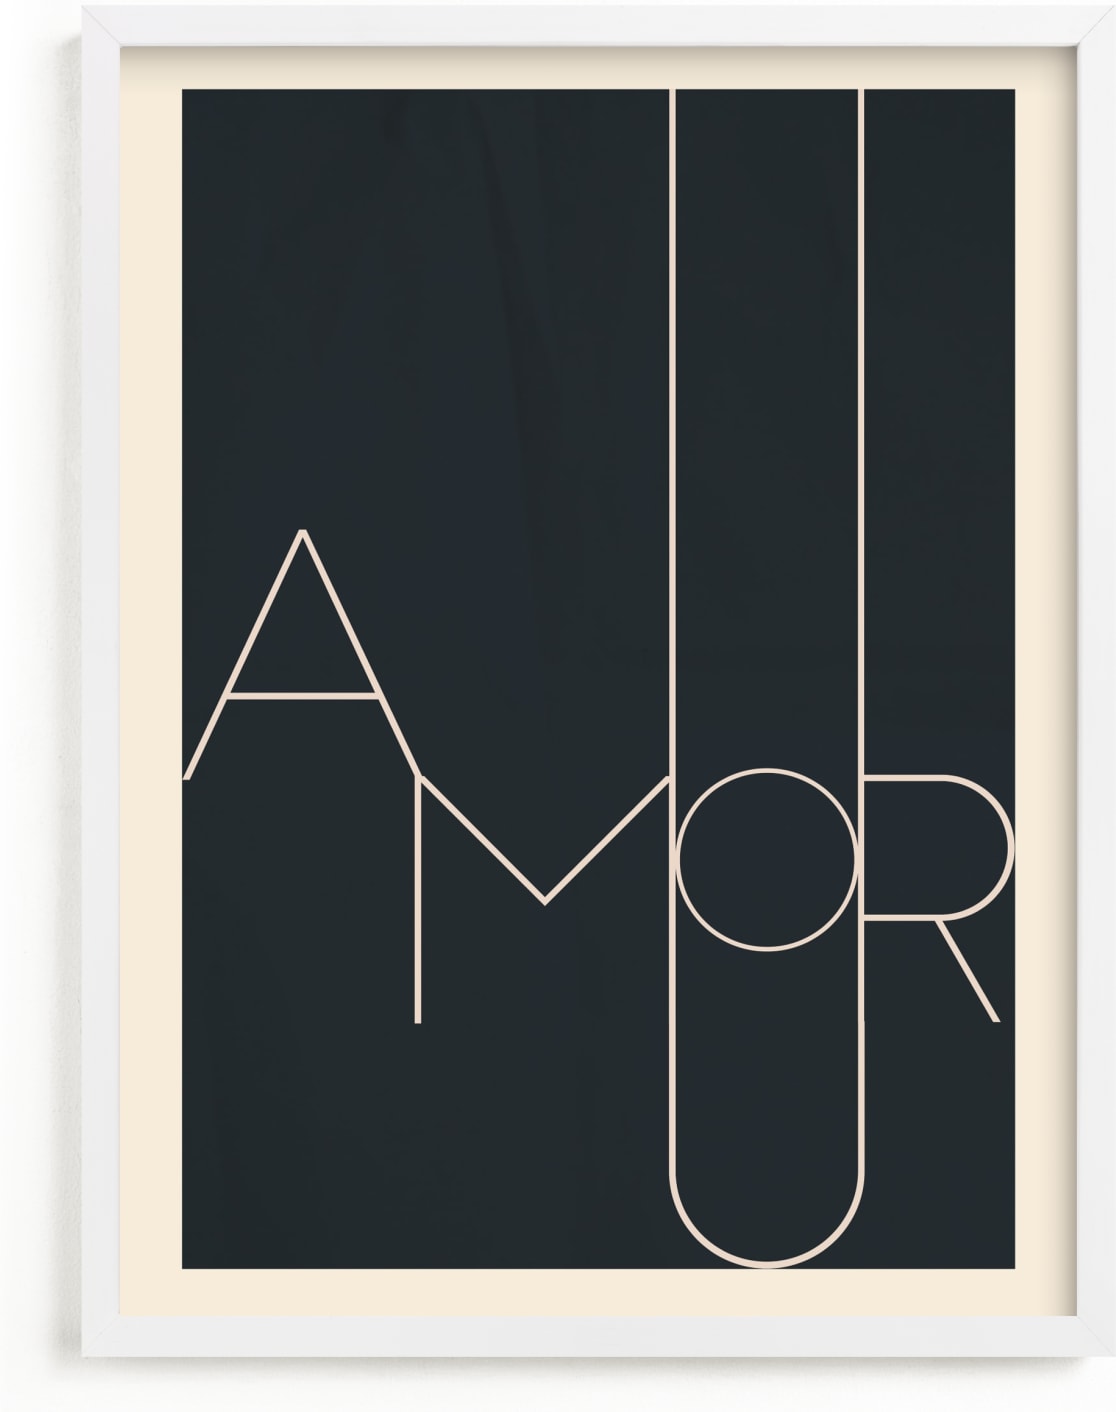 This is a ivory art by Morgan Kendall called Amour.